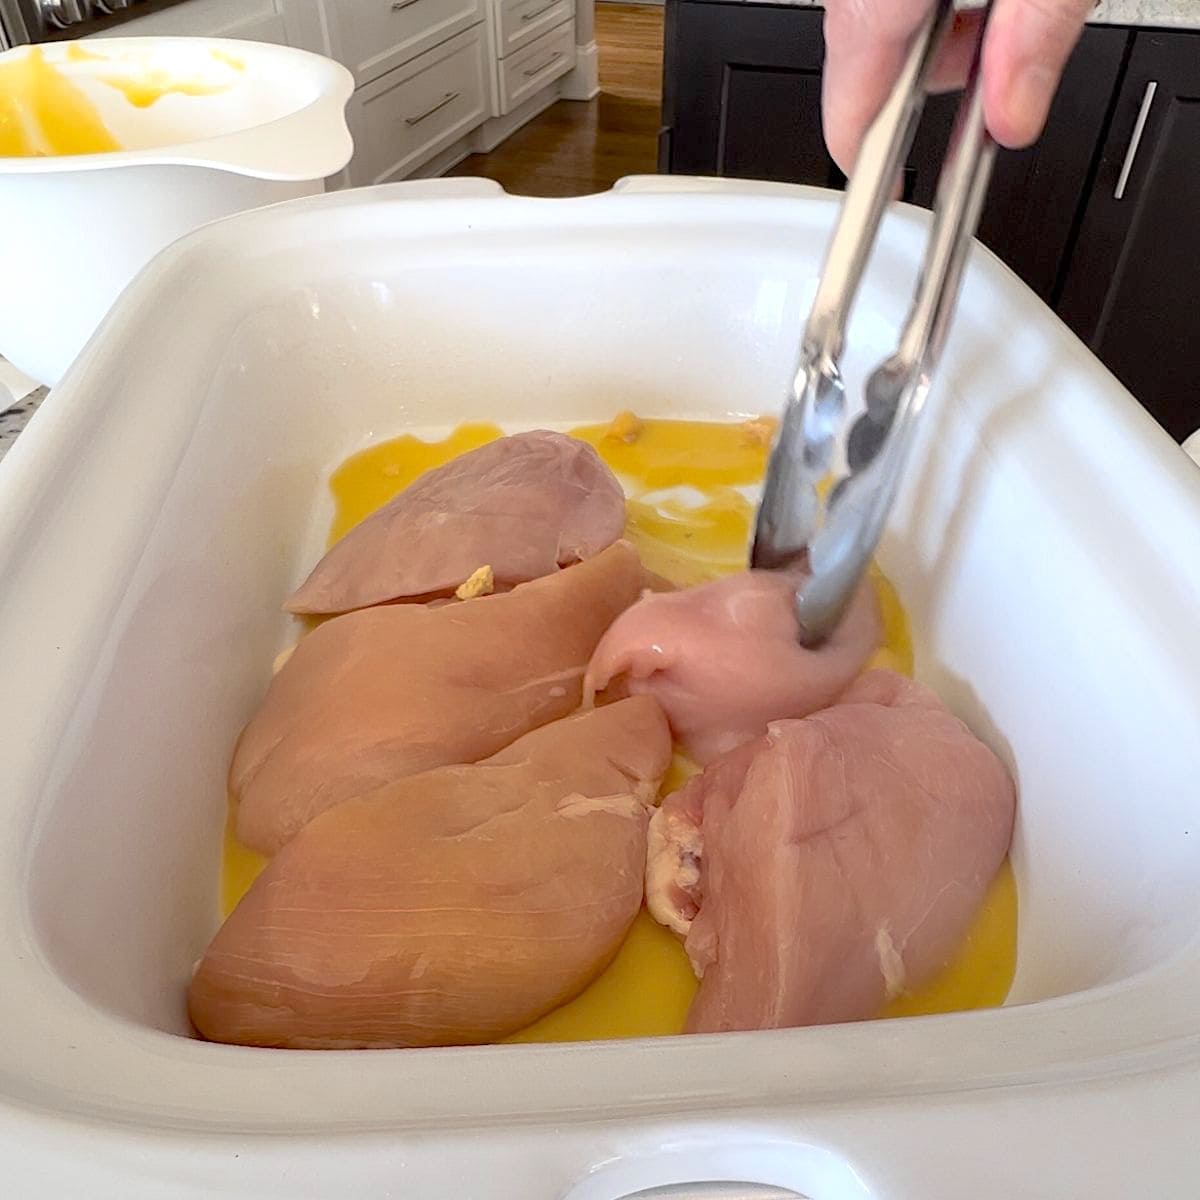 Placing the chicken breasts in a white rectangle crock pot.